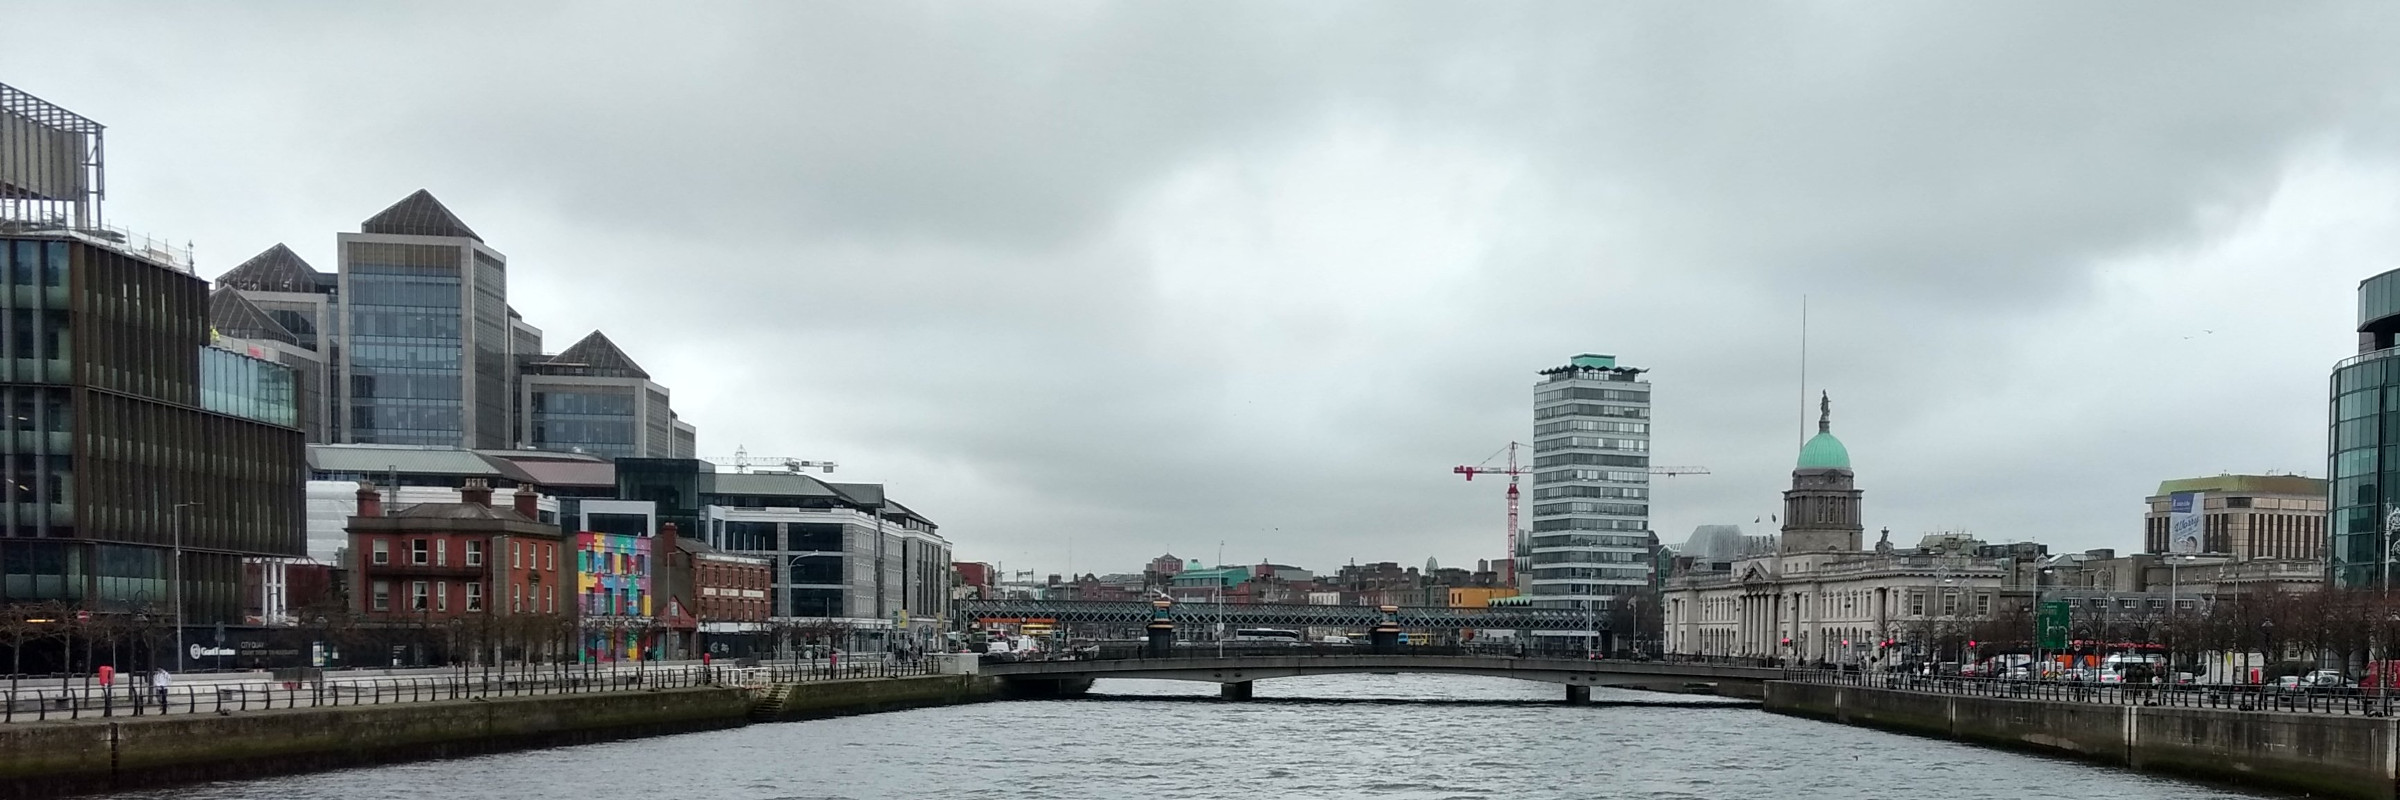 A picture of Dublin with the Liffey river